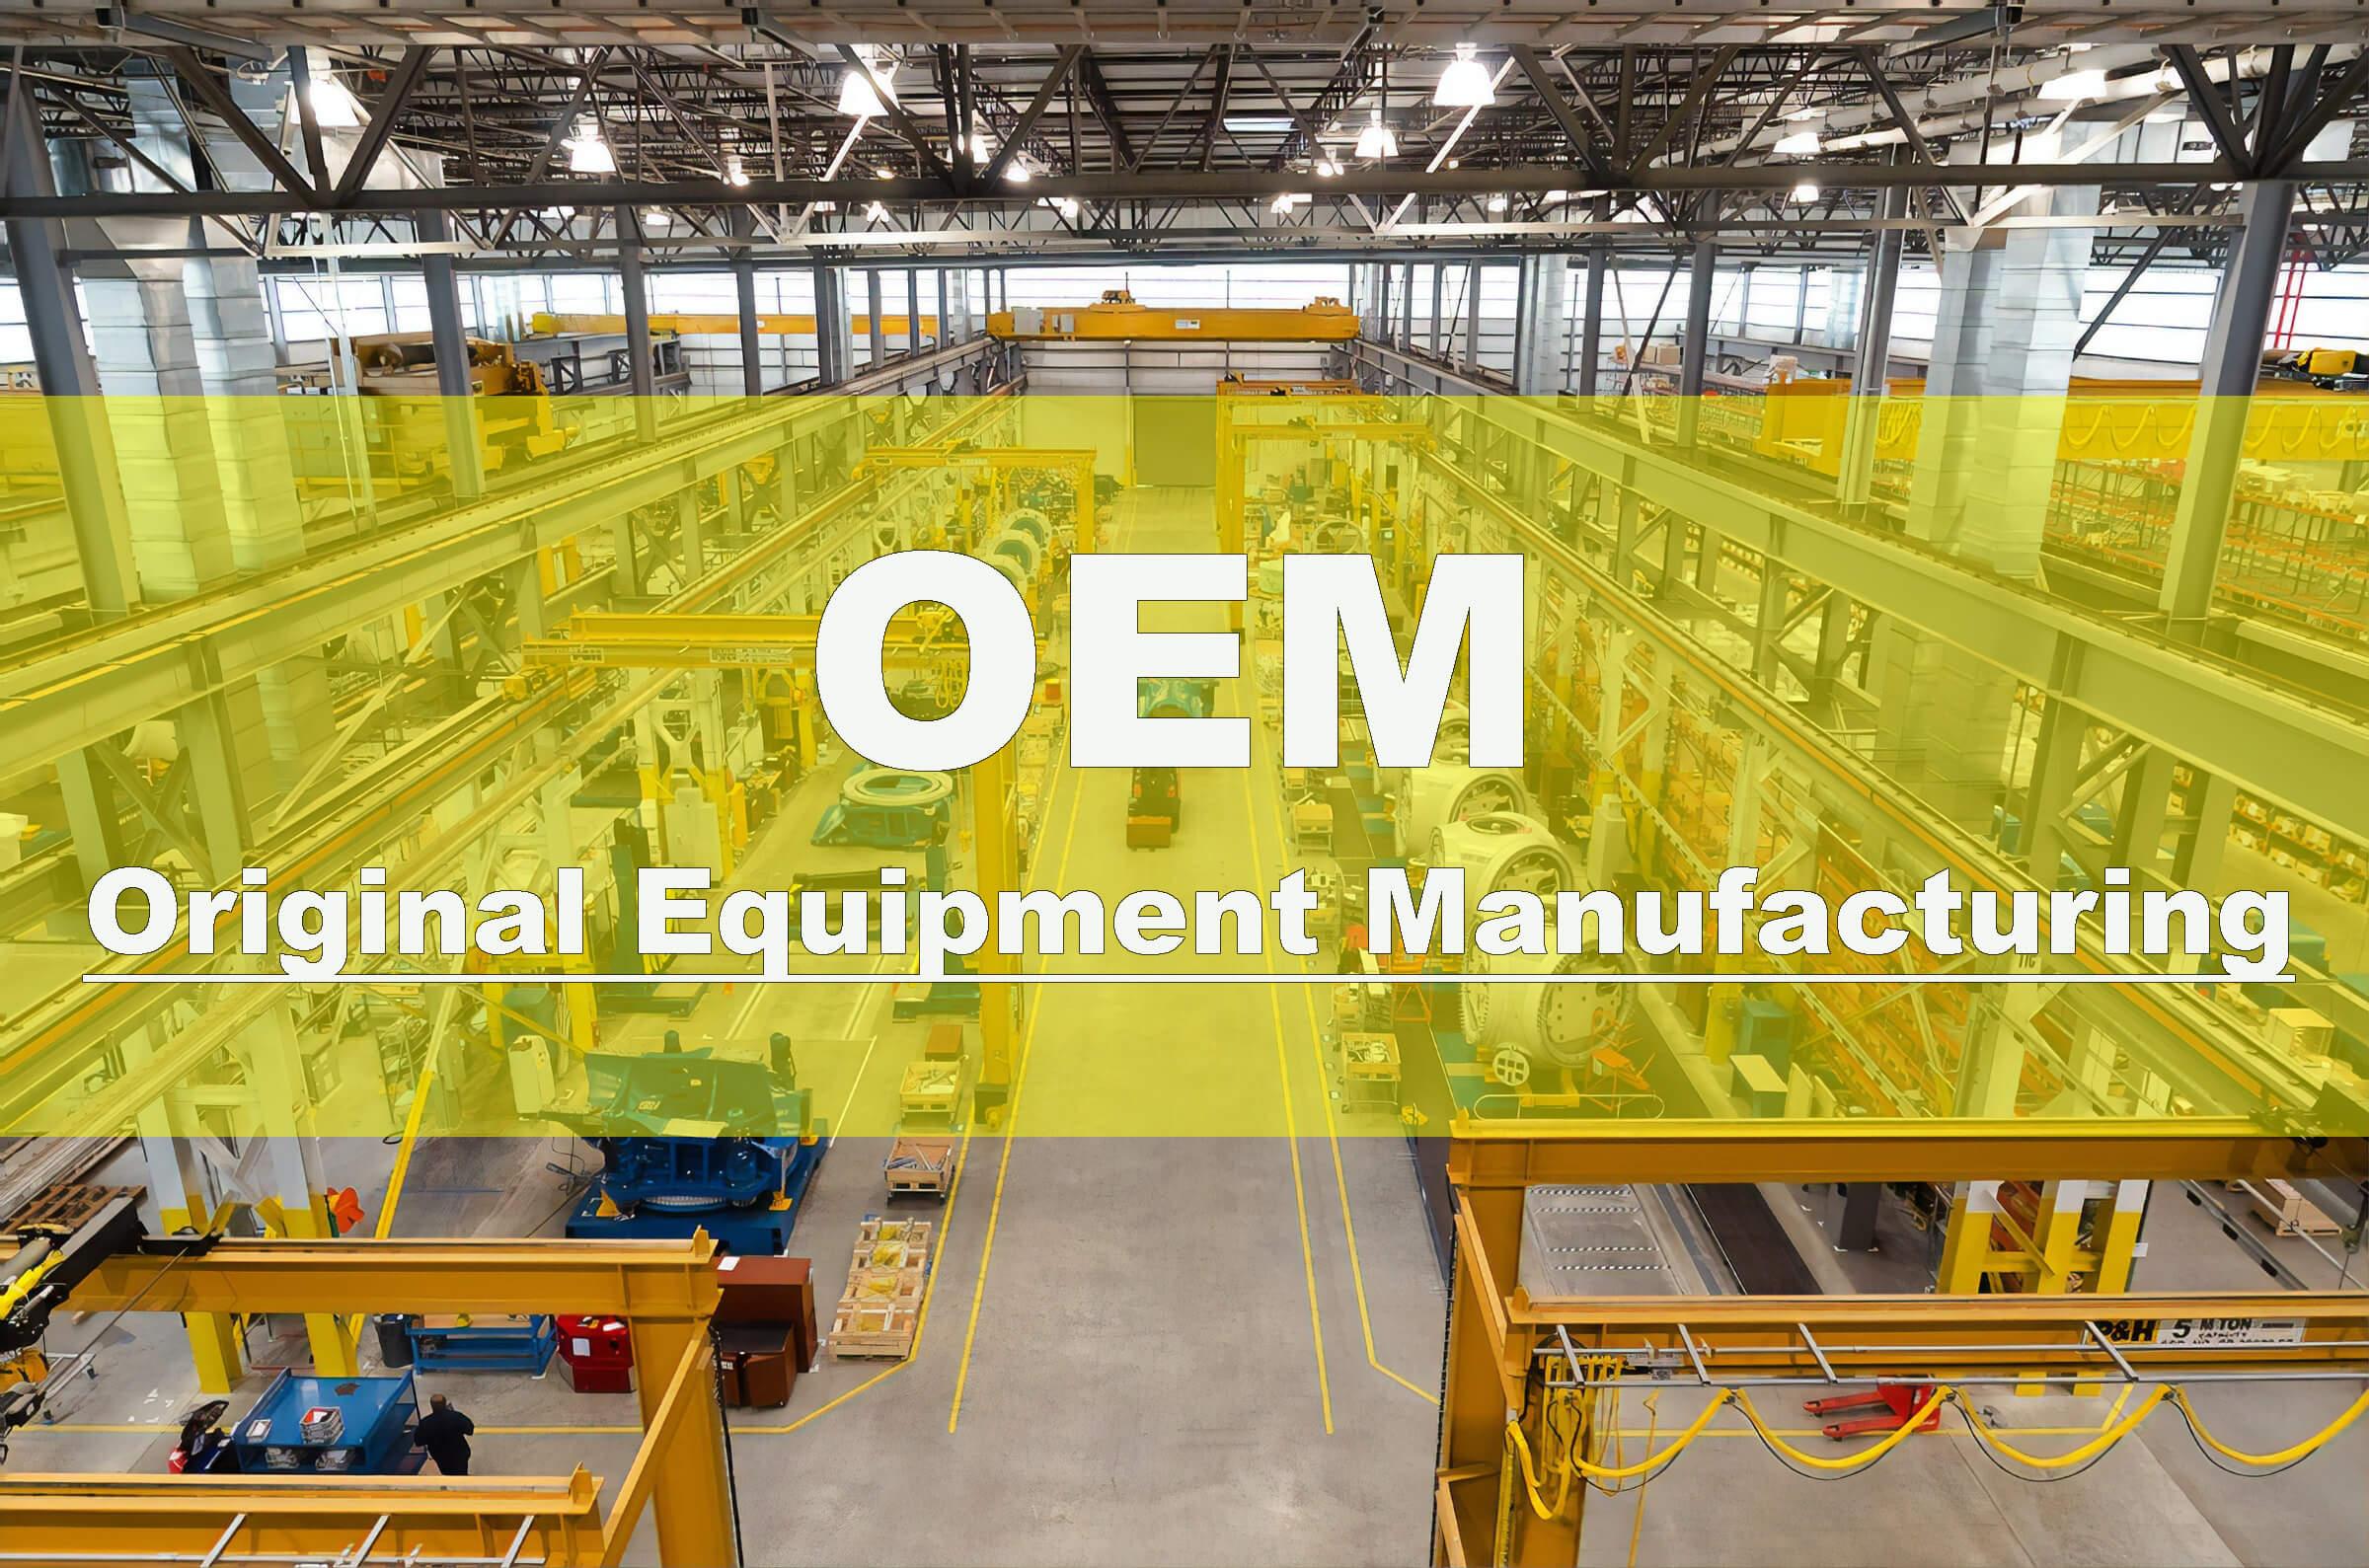 OEM vs ODM Manufacturing Which Is Right for Your Business?